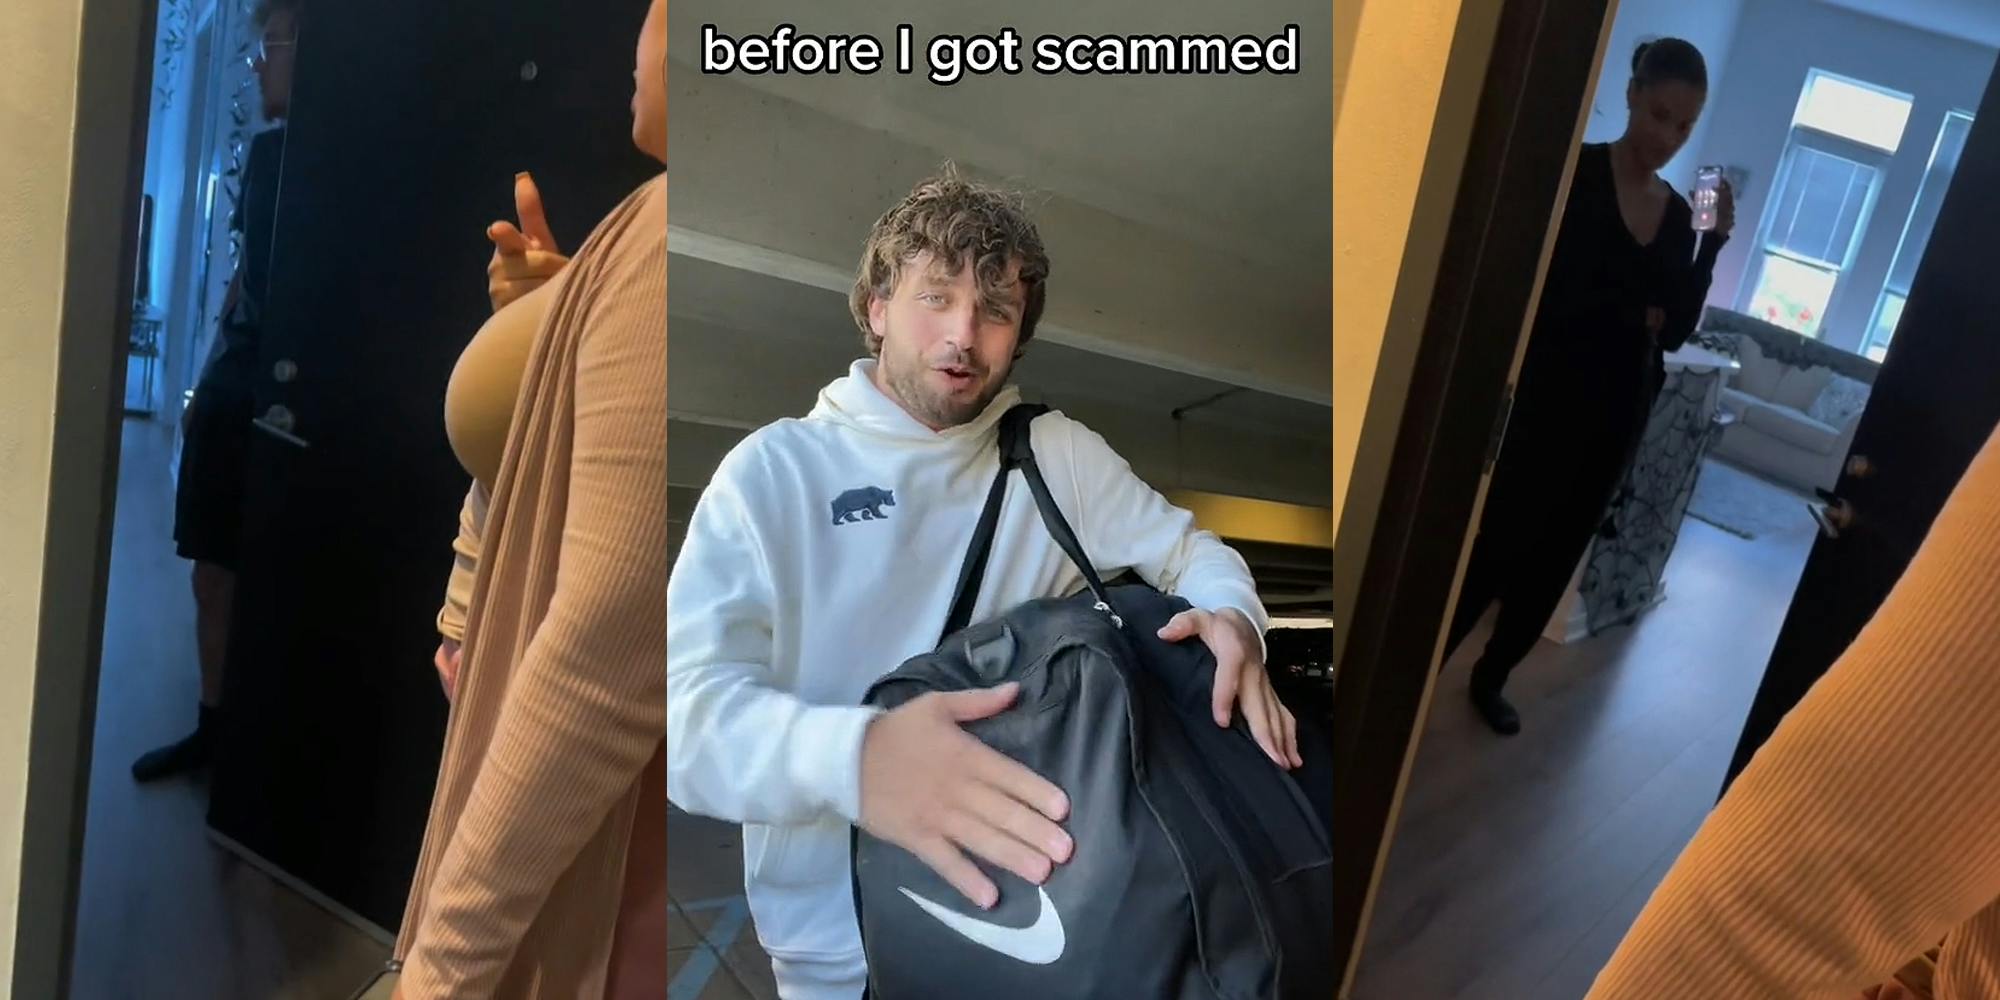 man holding open door into apartment, woman pointing to camera speaking outside of door (l) man holding Nike bag with hand on it caption "before I got scammed" (c) Woman on speaker phone call through open apartment door speaking to woman and cameraman (r)